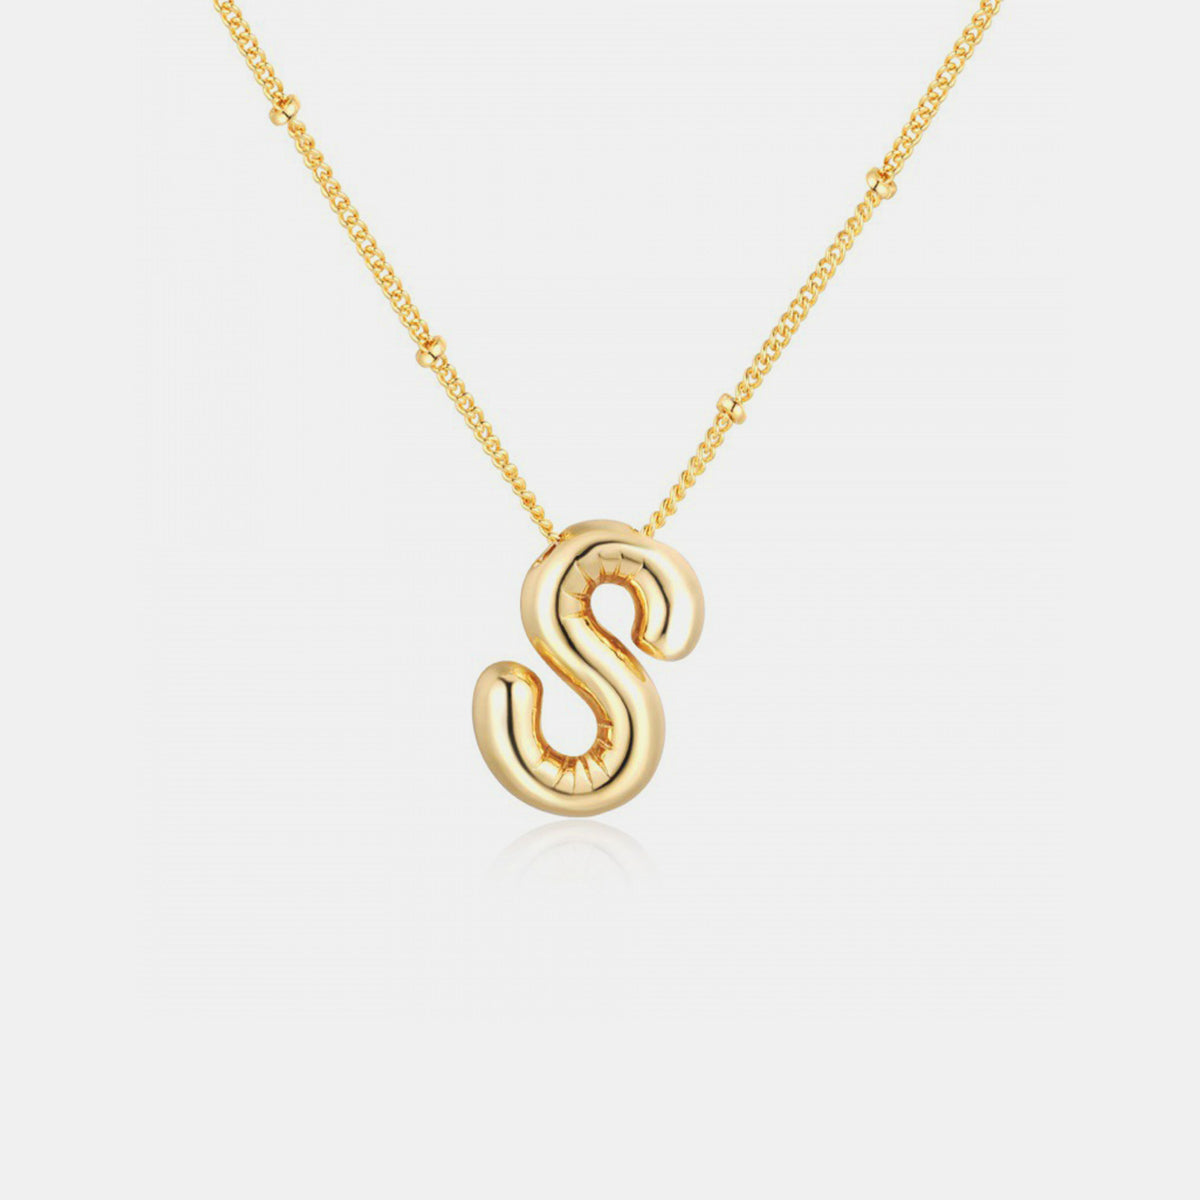 TEEK - K-S Gold-Plated Letter Pendant Necklace JEWELRY TEEK Trend Style S  